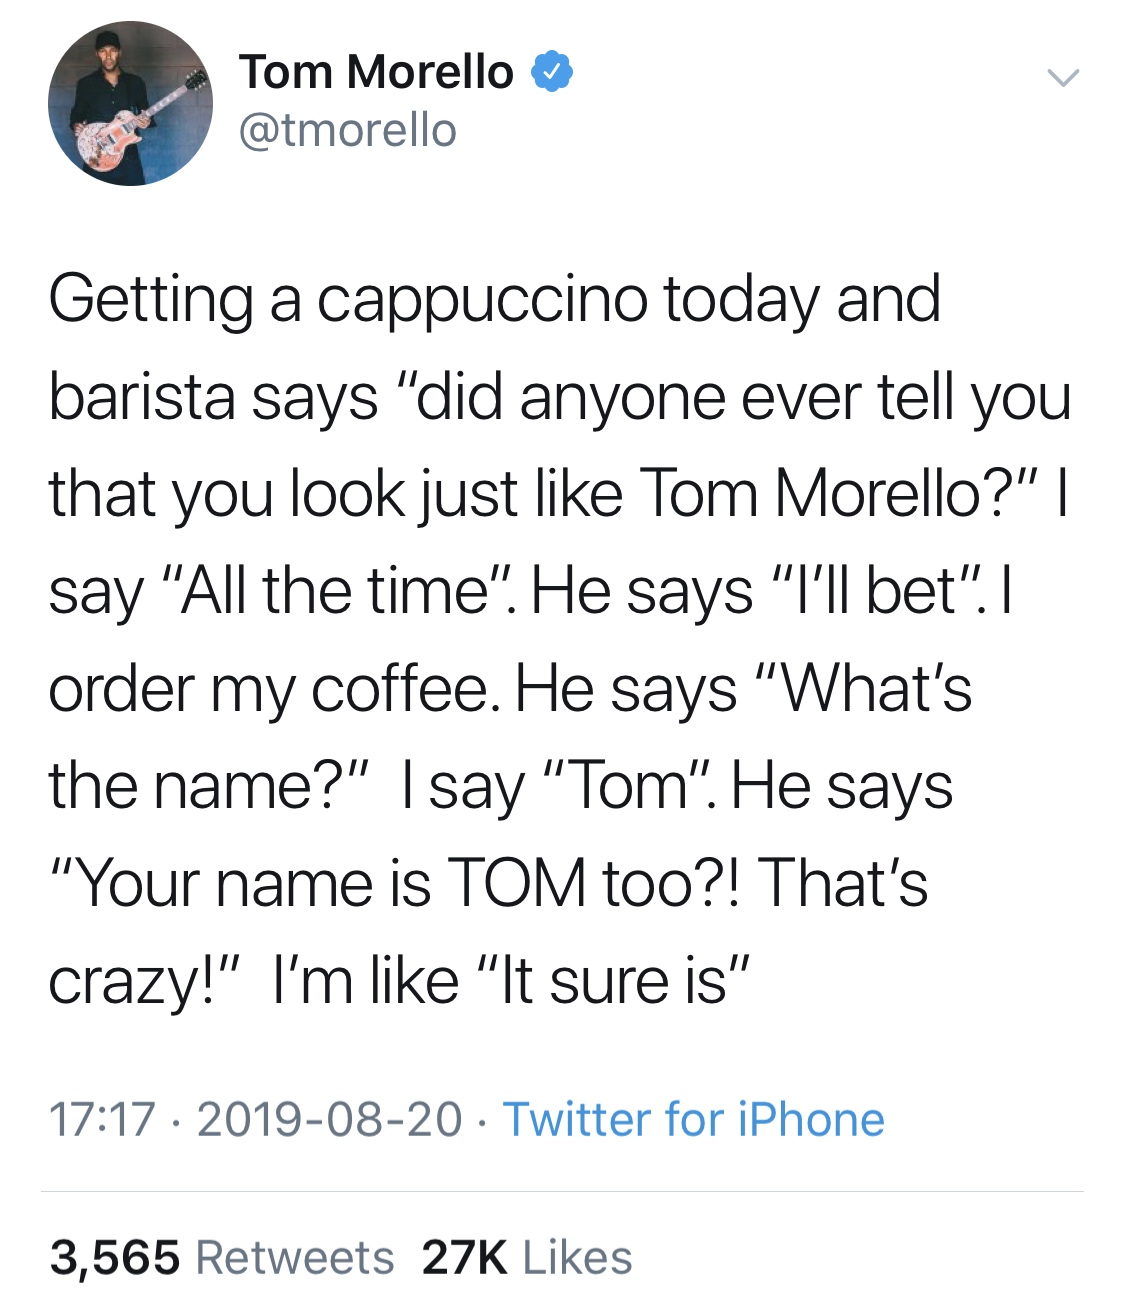 understanding power dynamics - Tom Morello Getting a cappuccino today and barista says "did anyone ever tell you that you look just Tom Morello?"| say "All the time". He says "I'll bet". I order my coffee. He says "What's the name?" I say "Tom". He says "